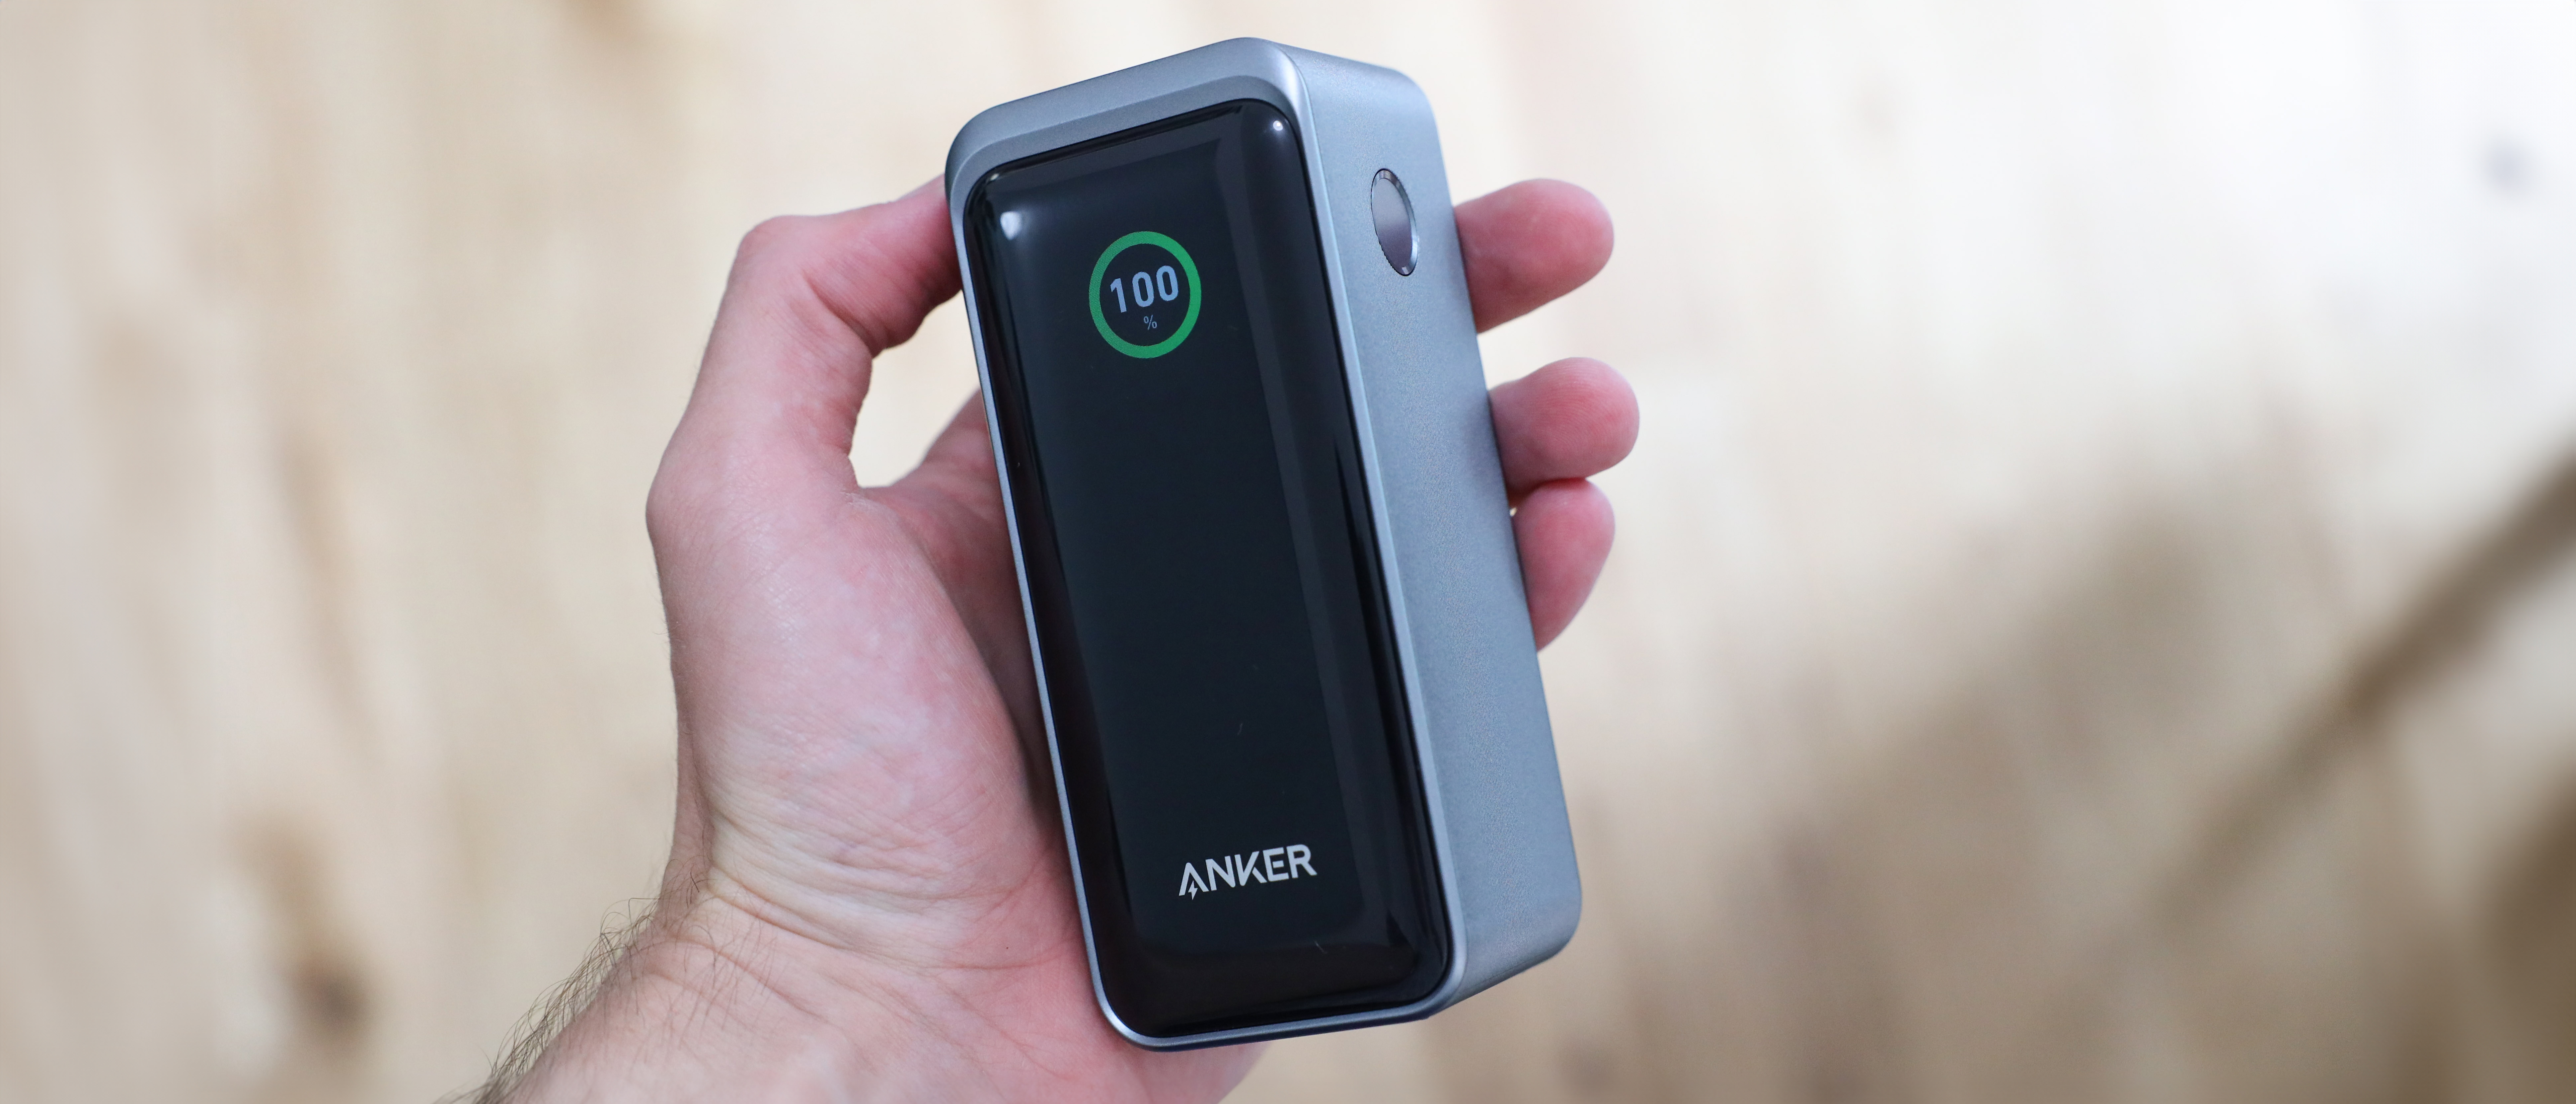 Anker Prime 250W power bank review – Pickr